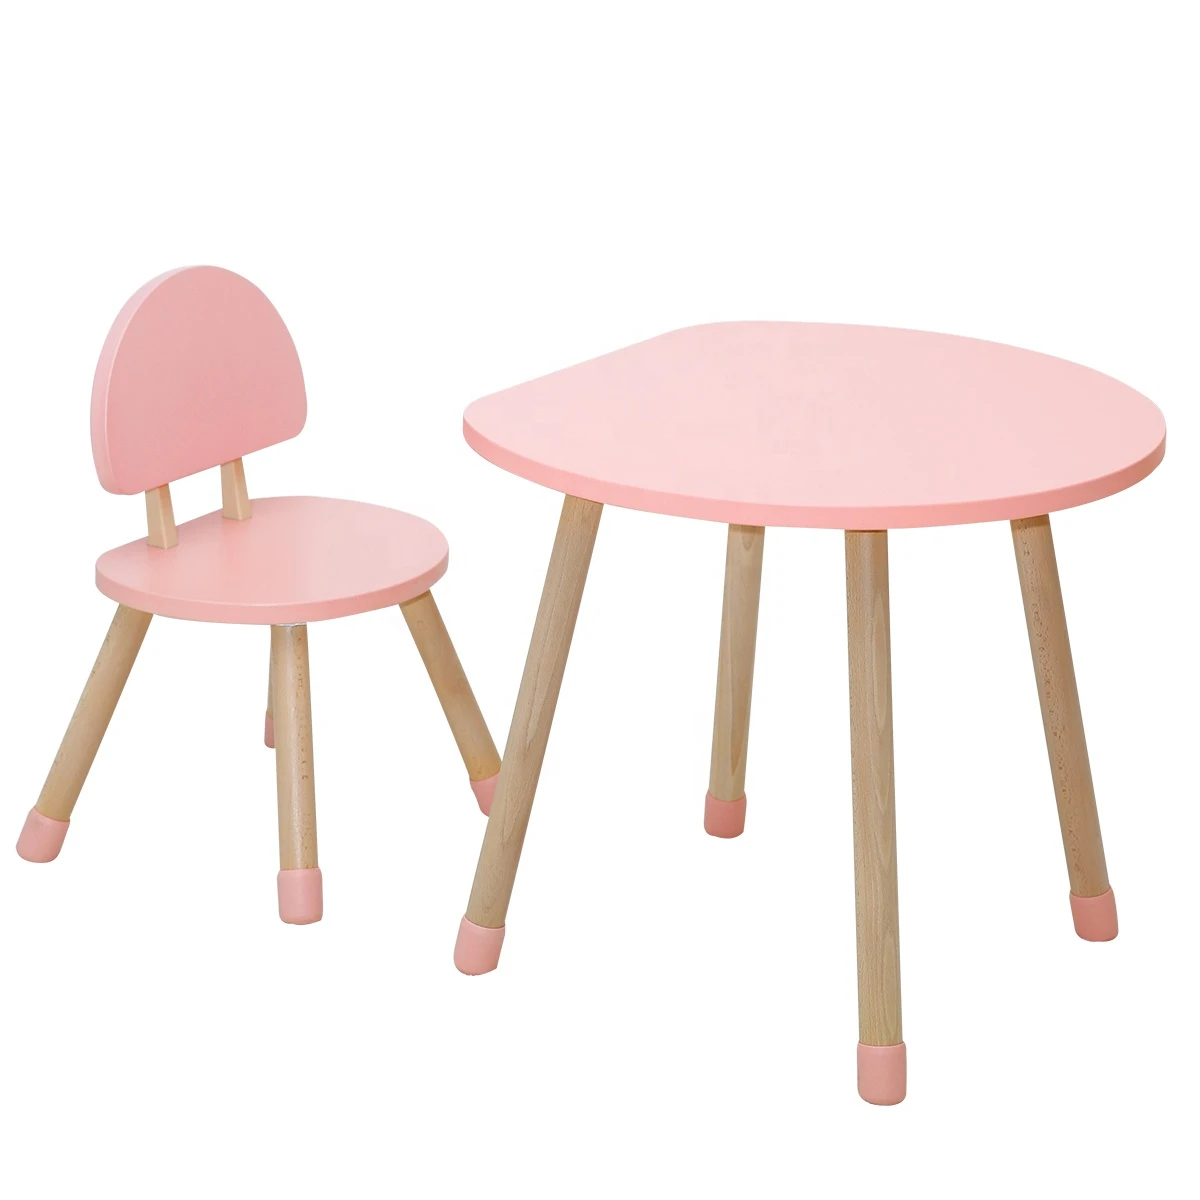 New Style Wooden Kids Mushroom Shape Table and Chair Set Children Home School Furniture